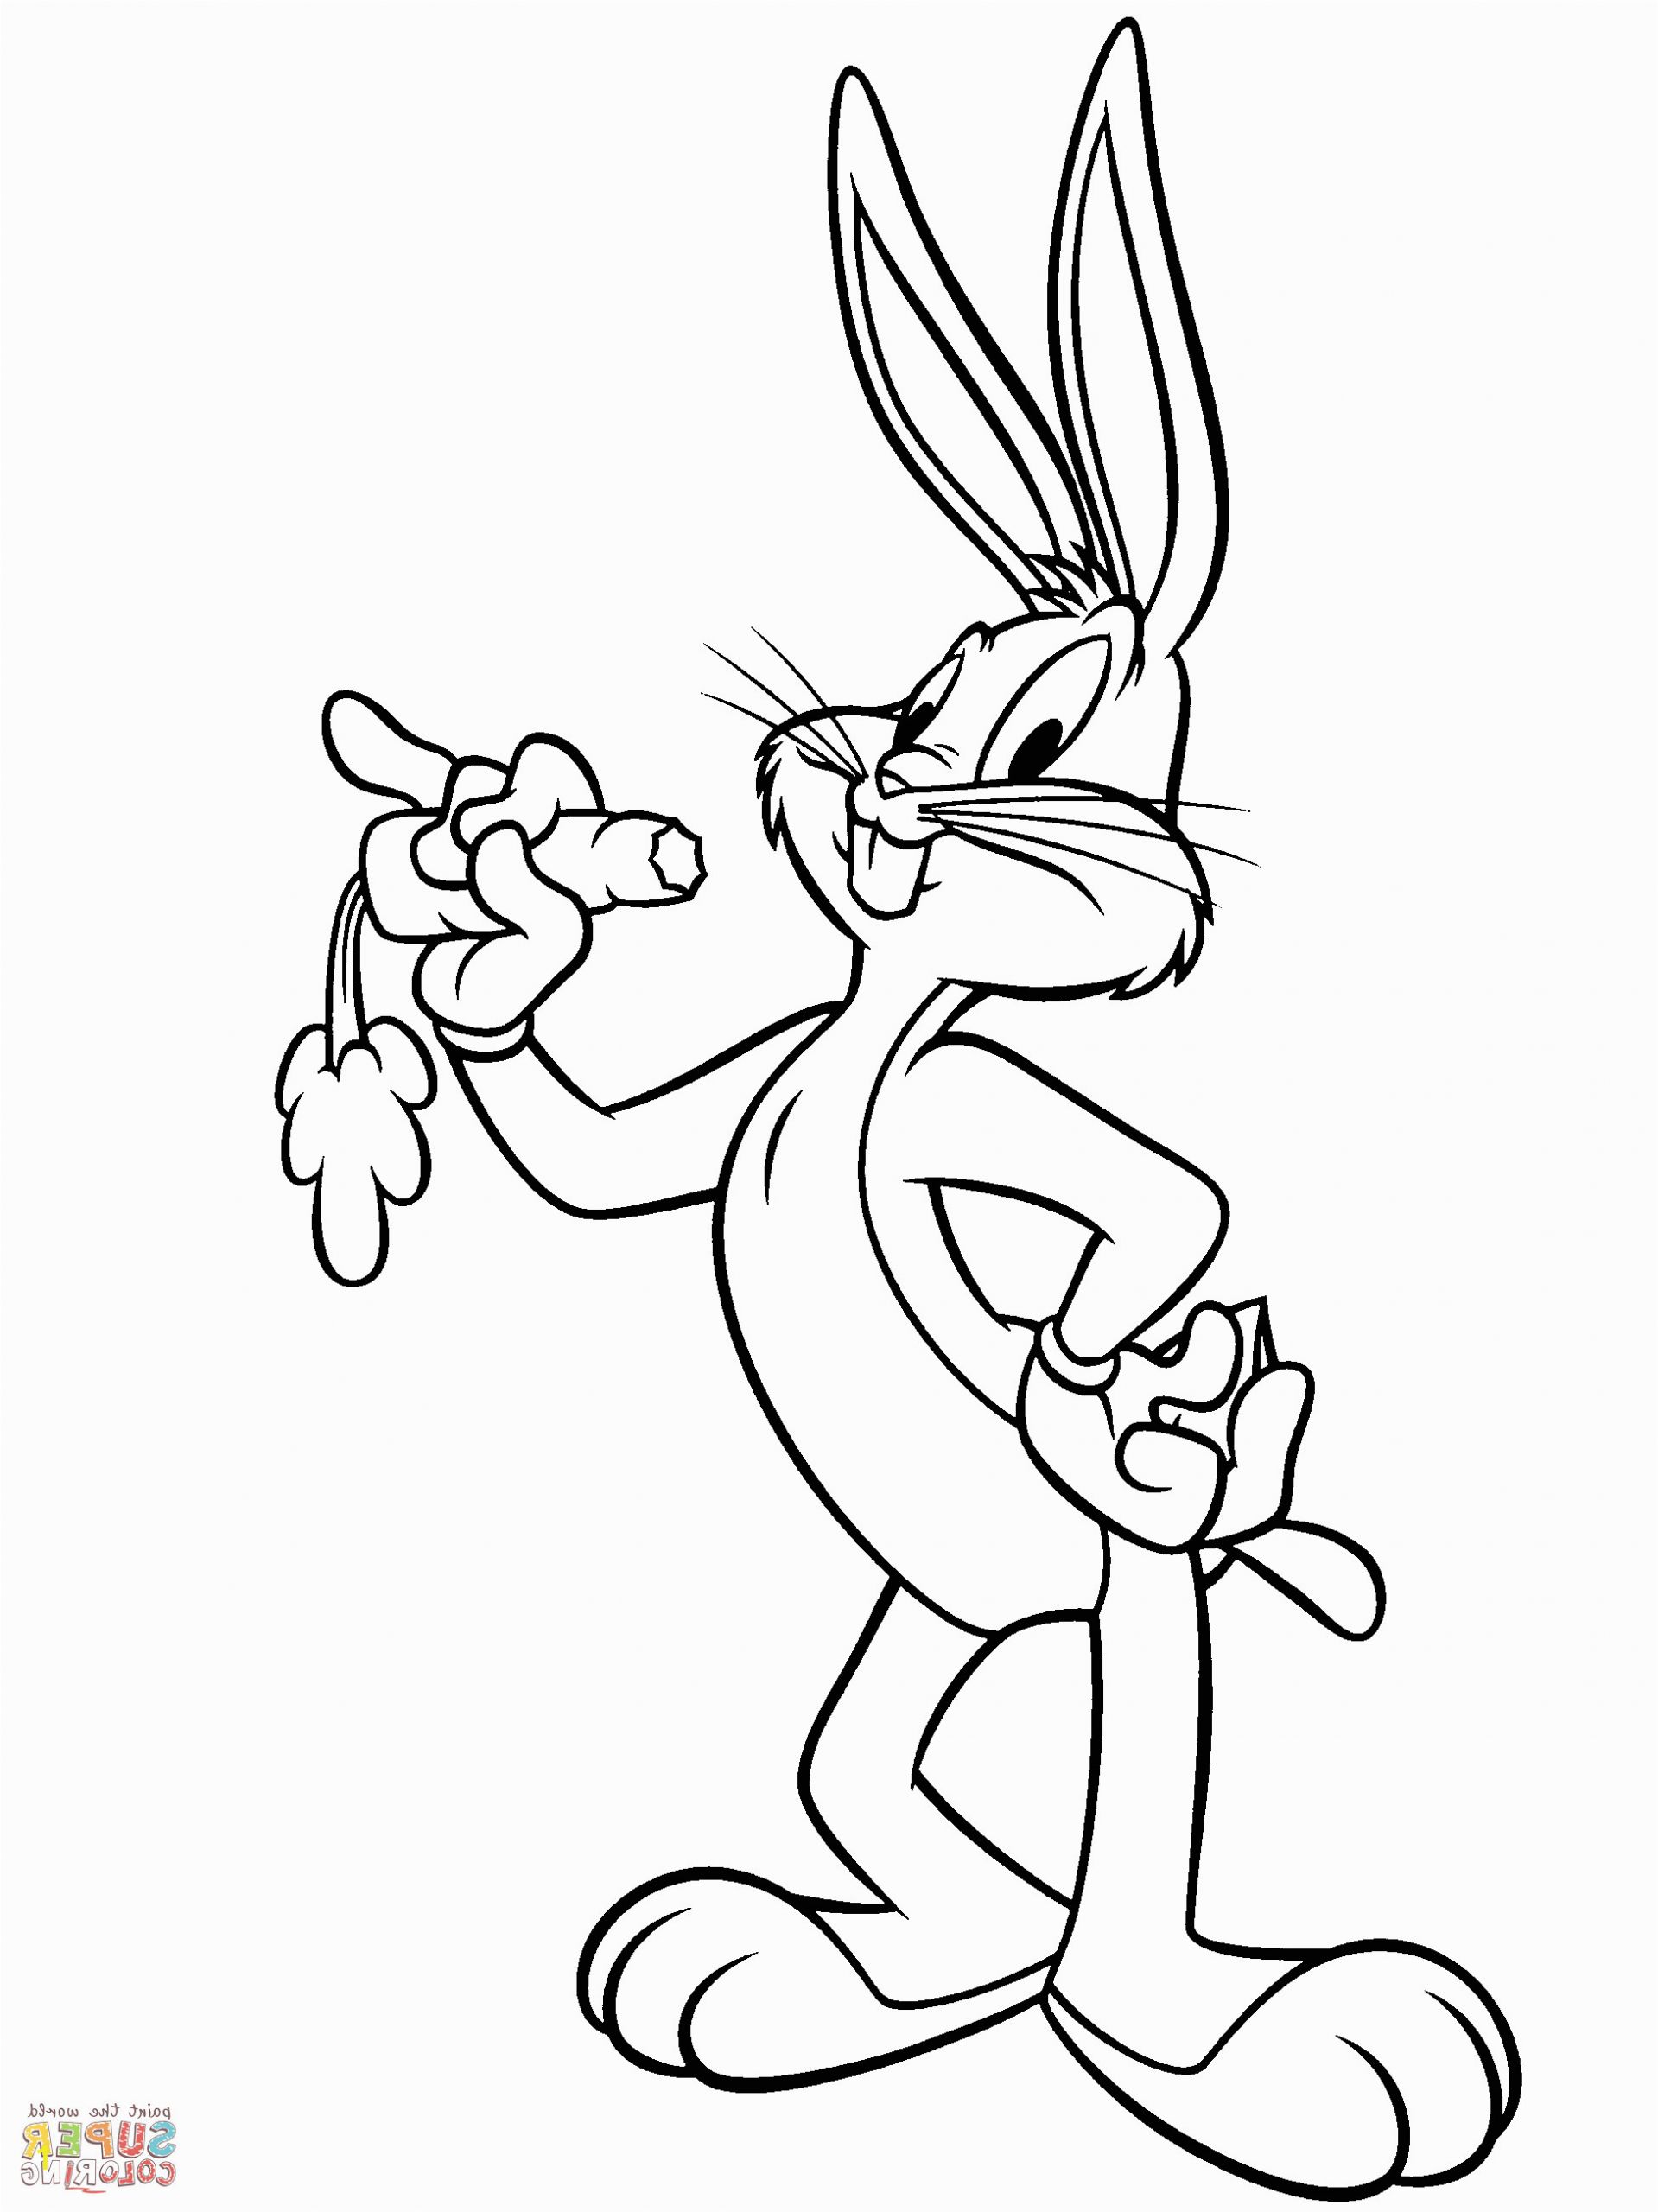 loony tunes coloring inspirational collection looney tunes coloring pages bugs bunny baby looney tunes bugs bunny of loony tunes coloring